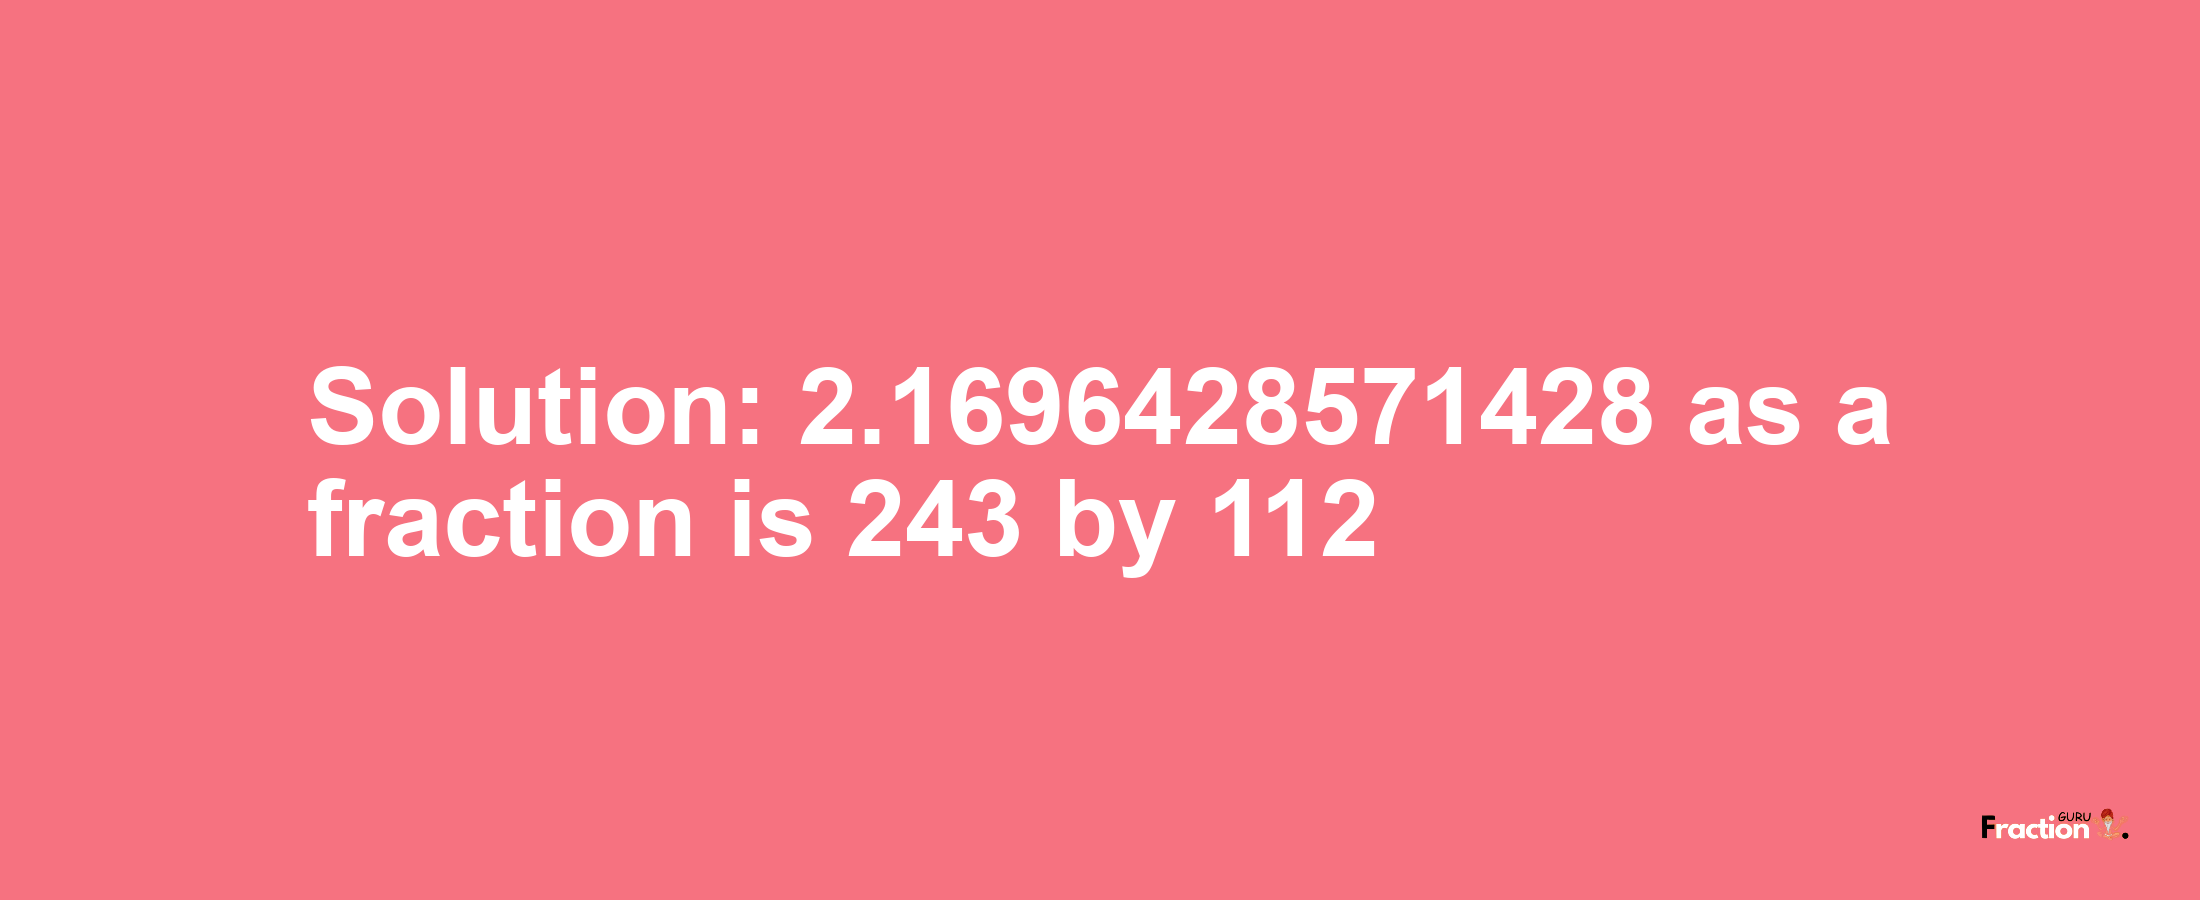 Solution:2.1696428571428 as a fraction is 243/112